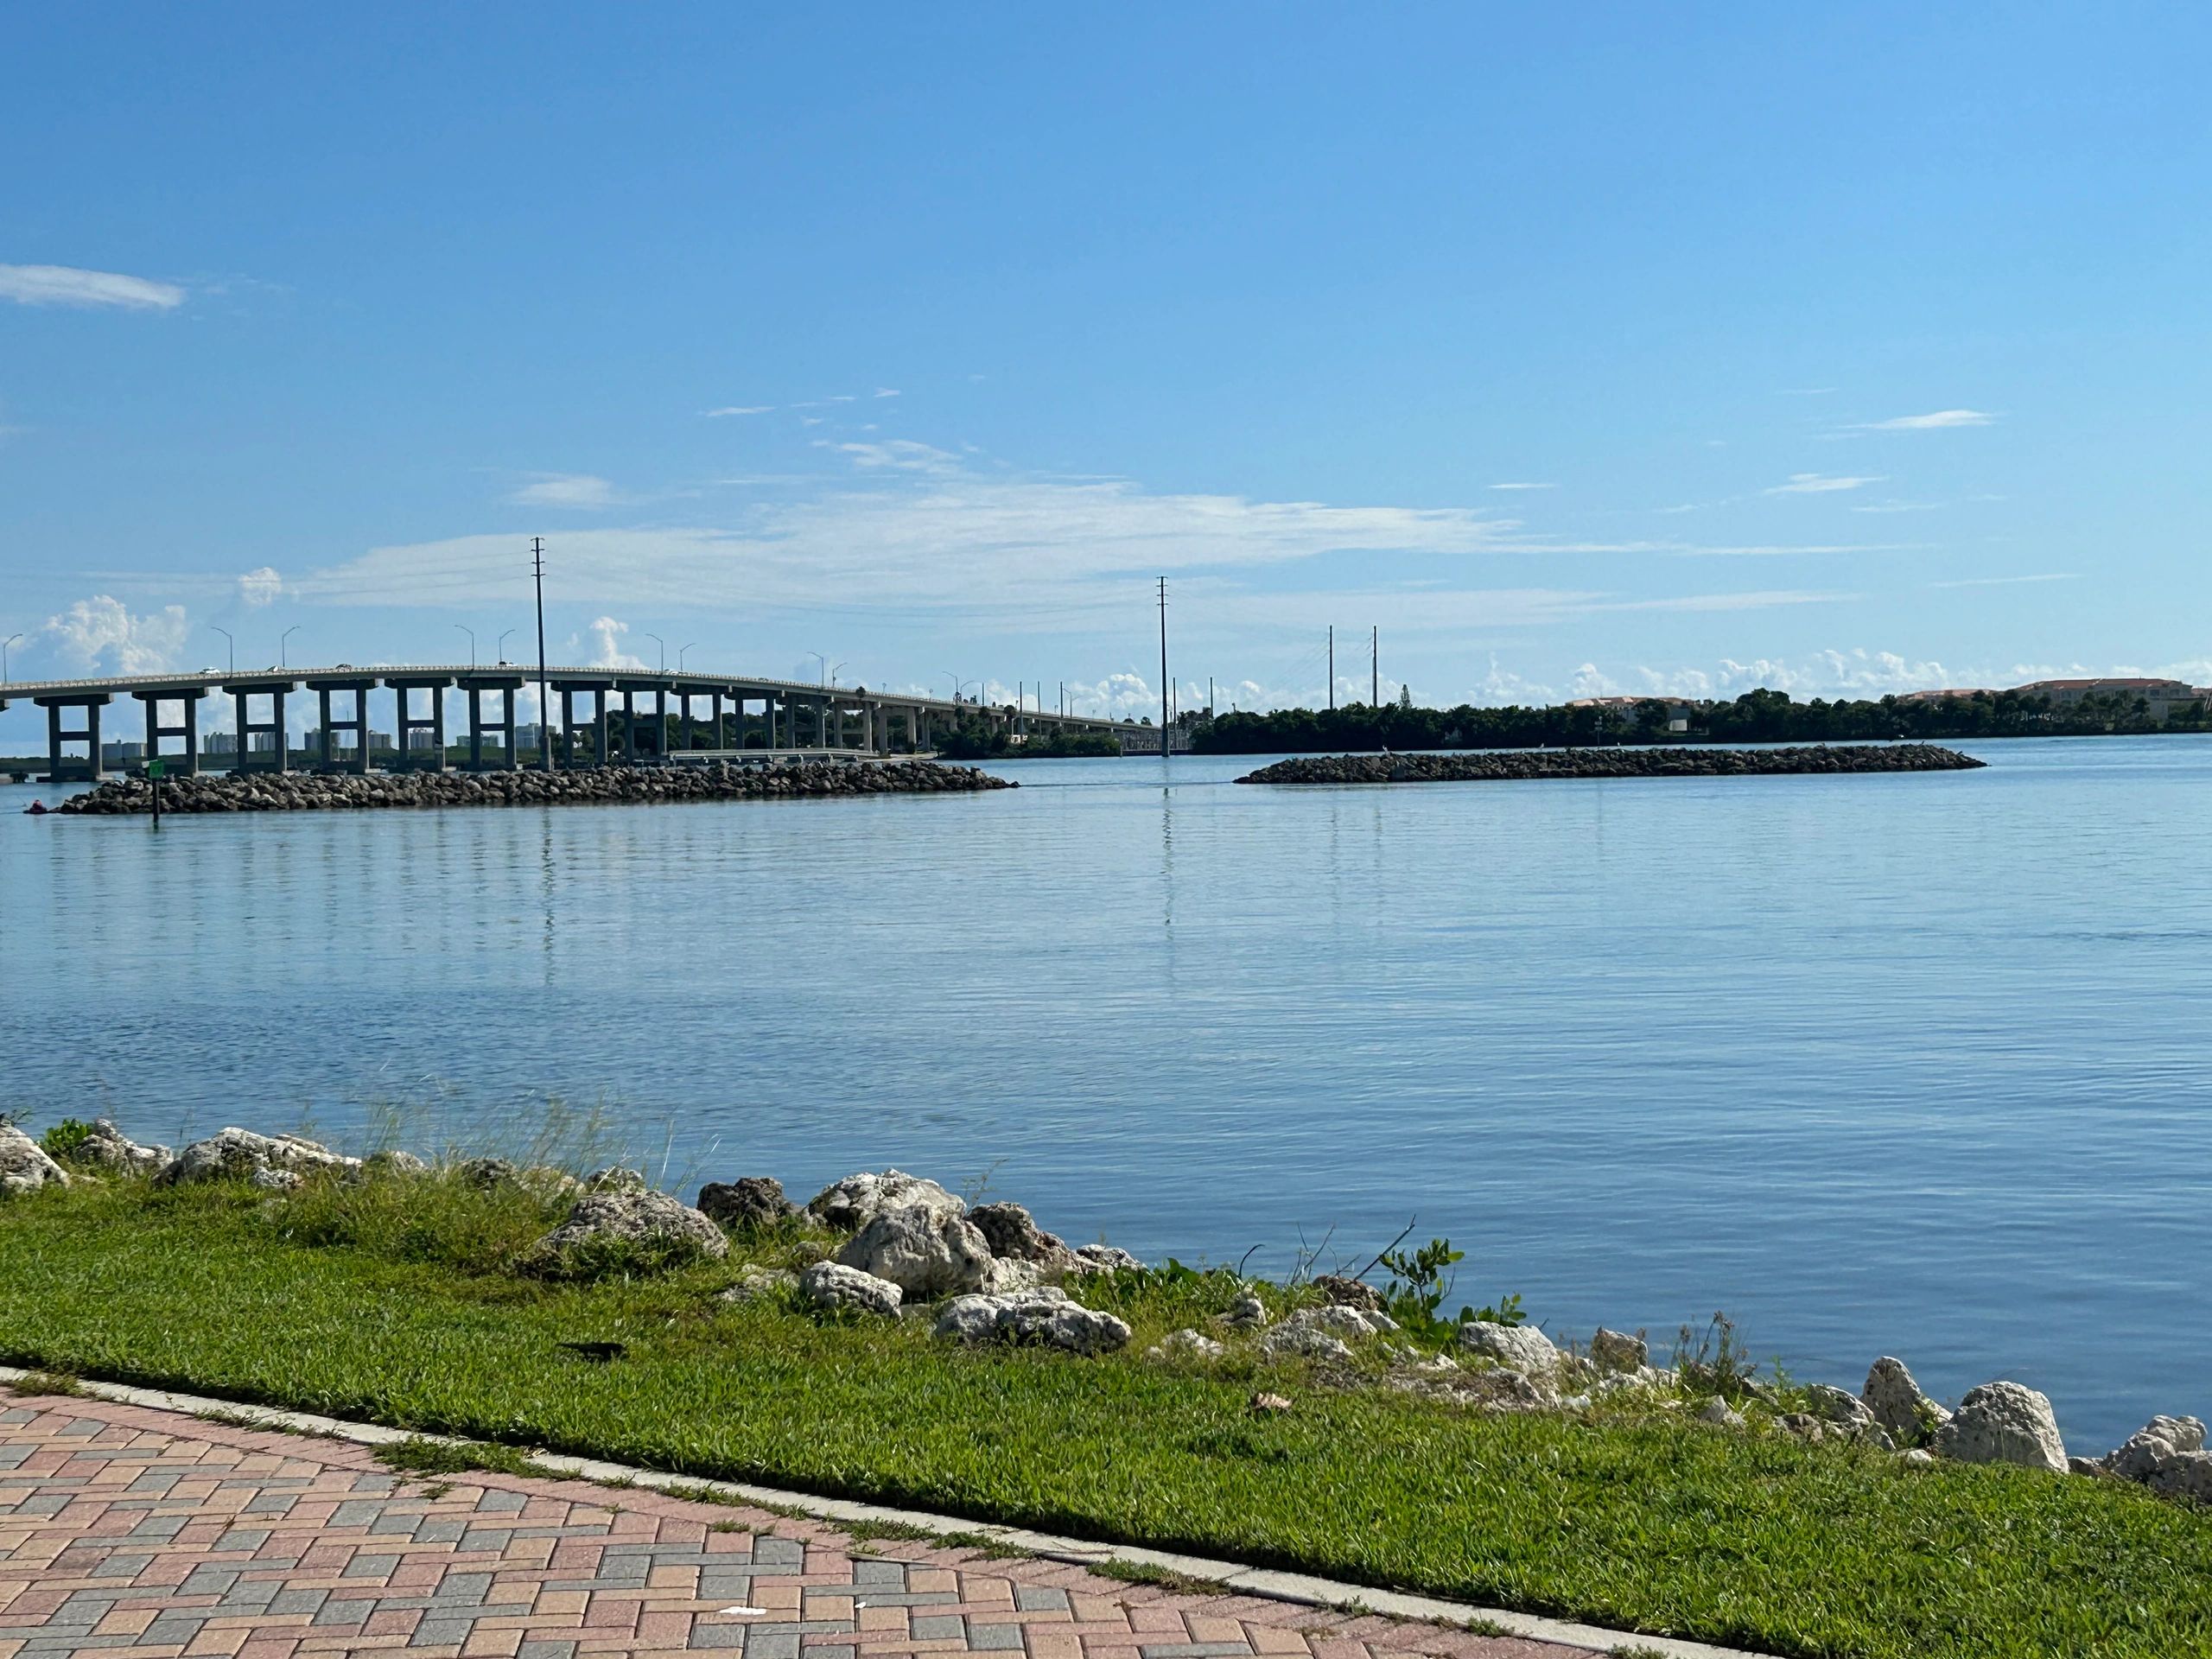 View of the Causeway bridge from the downtown waterfront walkway.